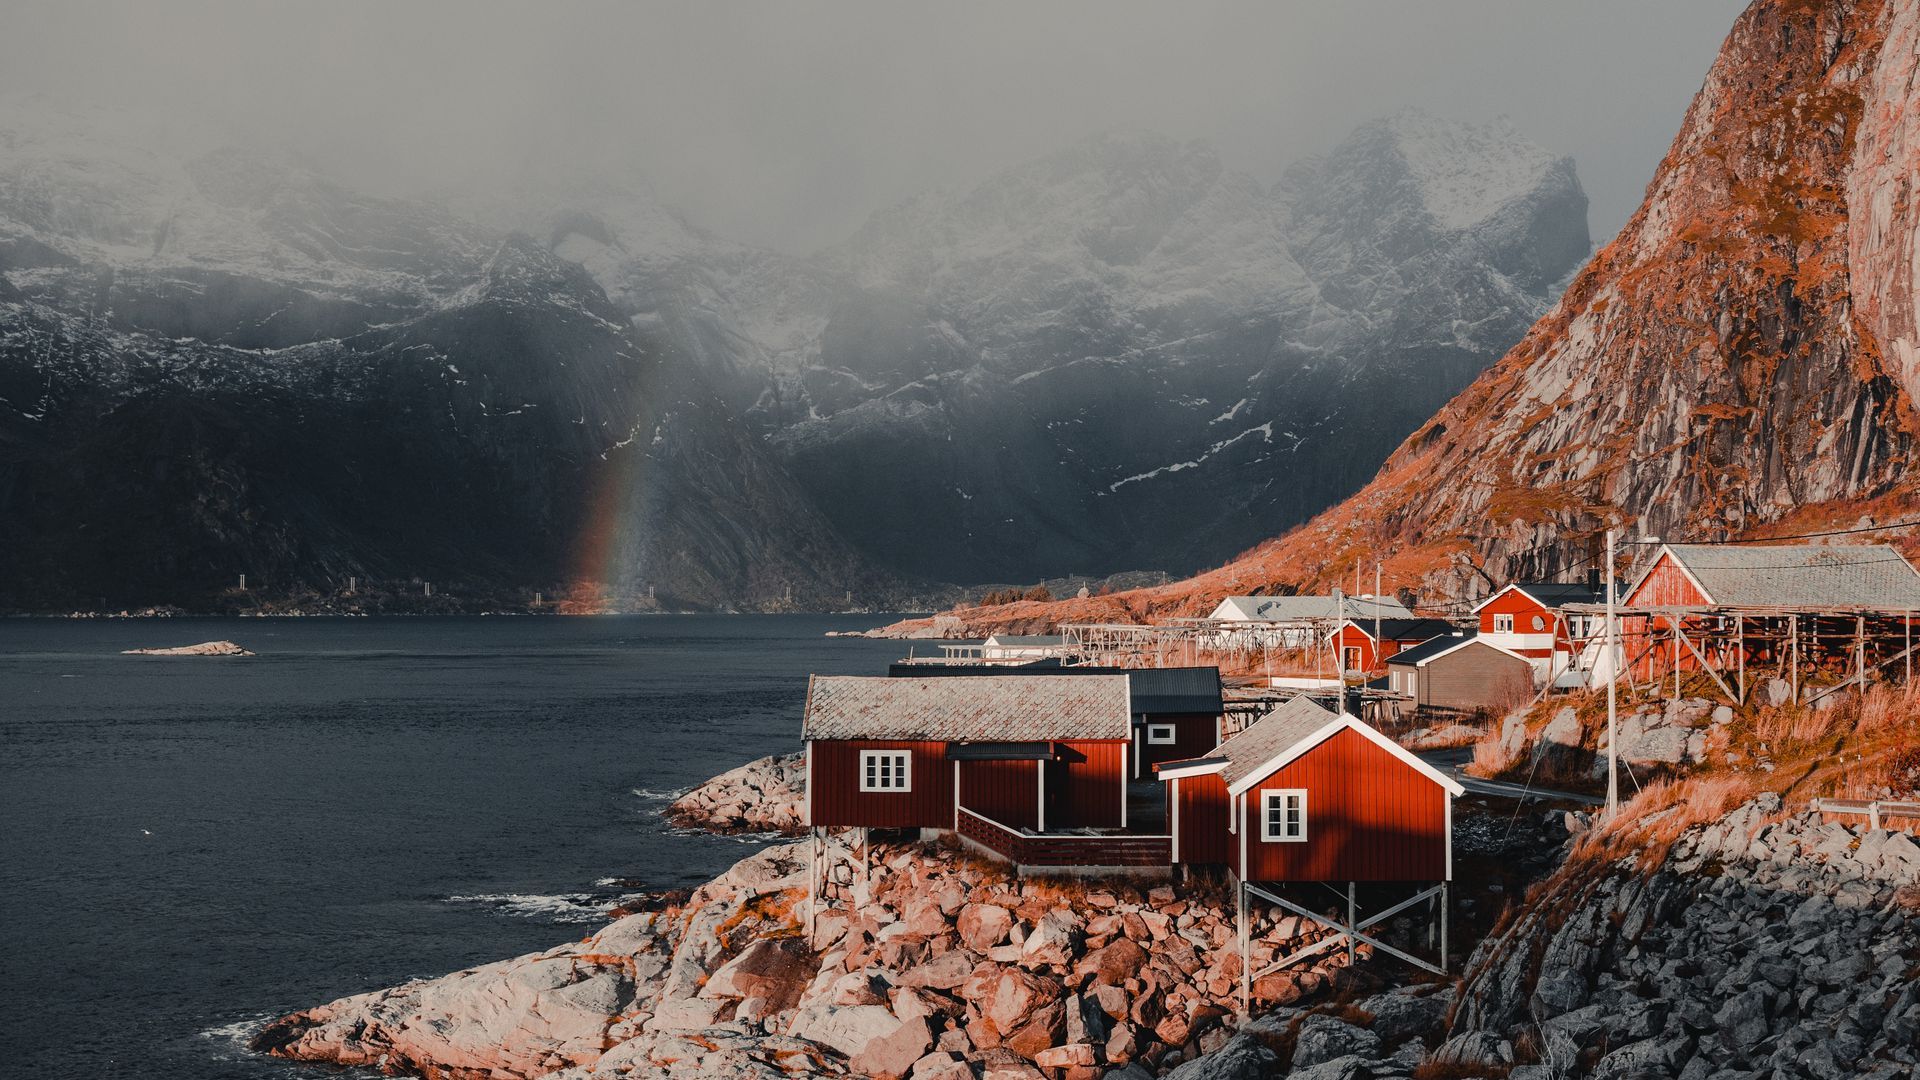 Download wallpaper 1920x1080 houses, mountains, fog, rainbow